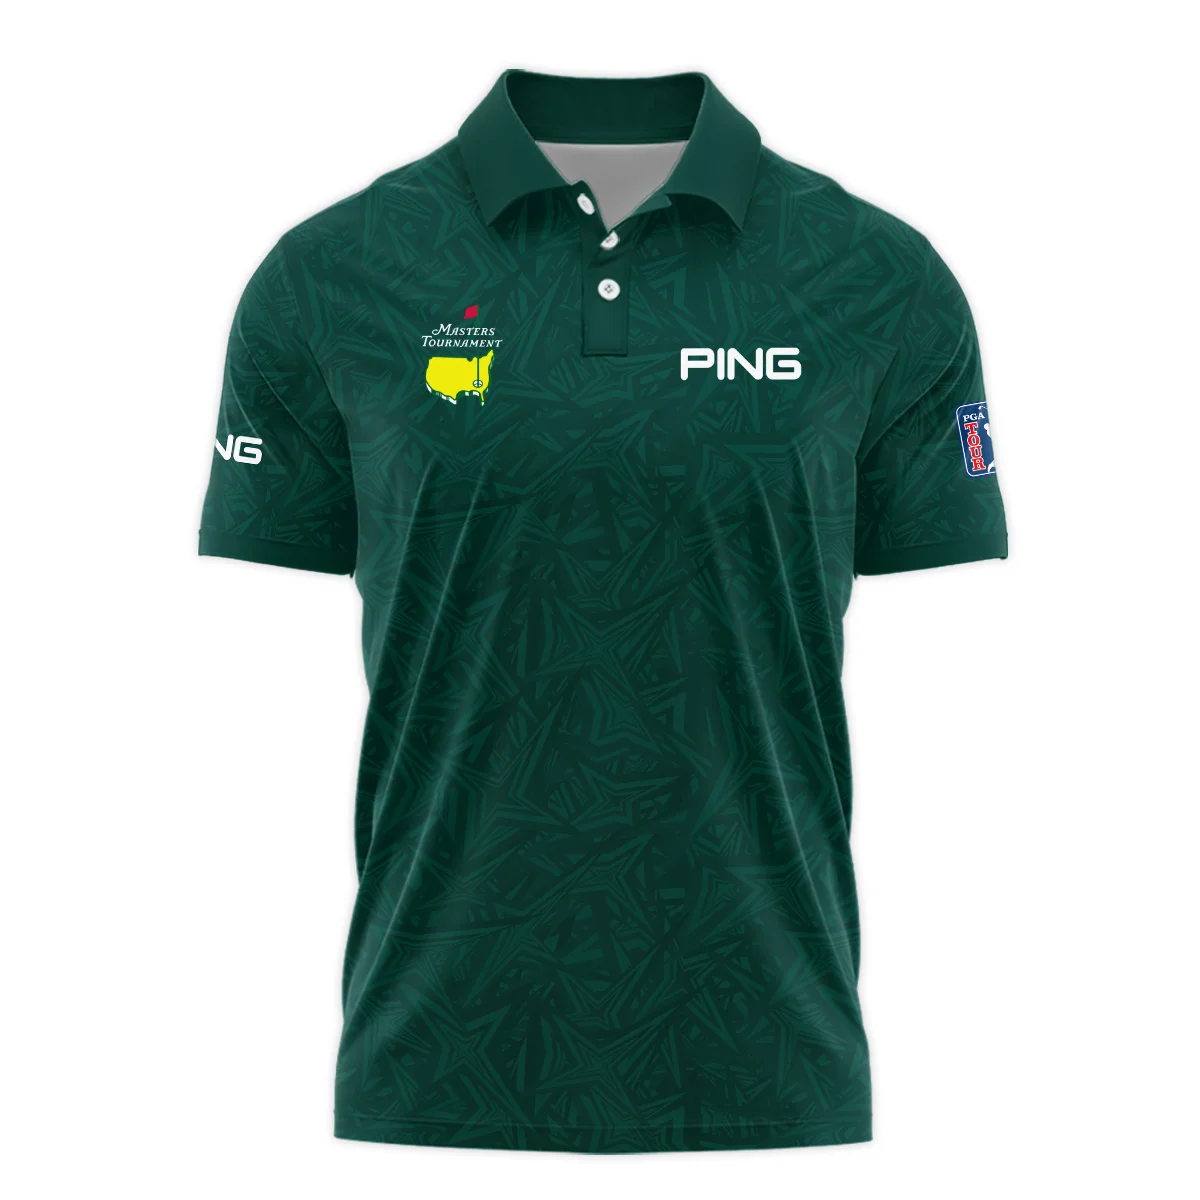 Stars Dark Green Abstract Sport Masters Tournament Ping Vneck Long Polo Shirt Style Classic Long Polo Shirt For Men